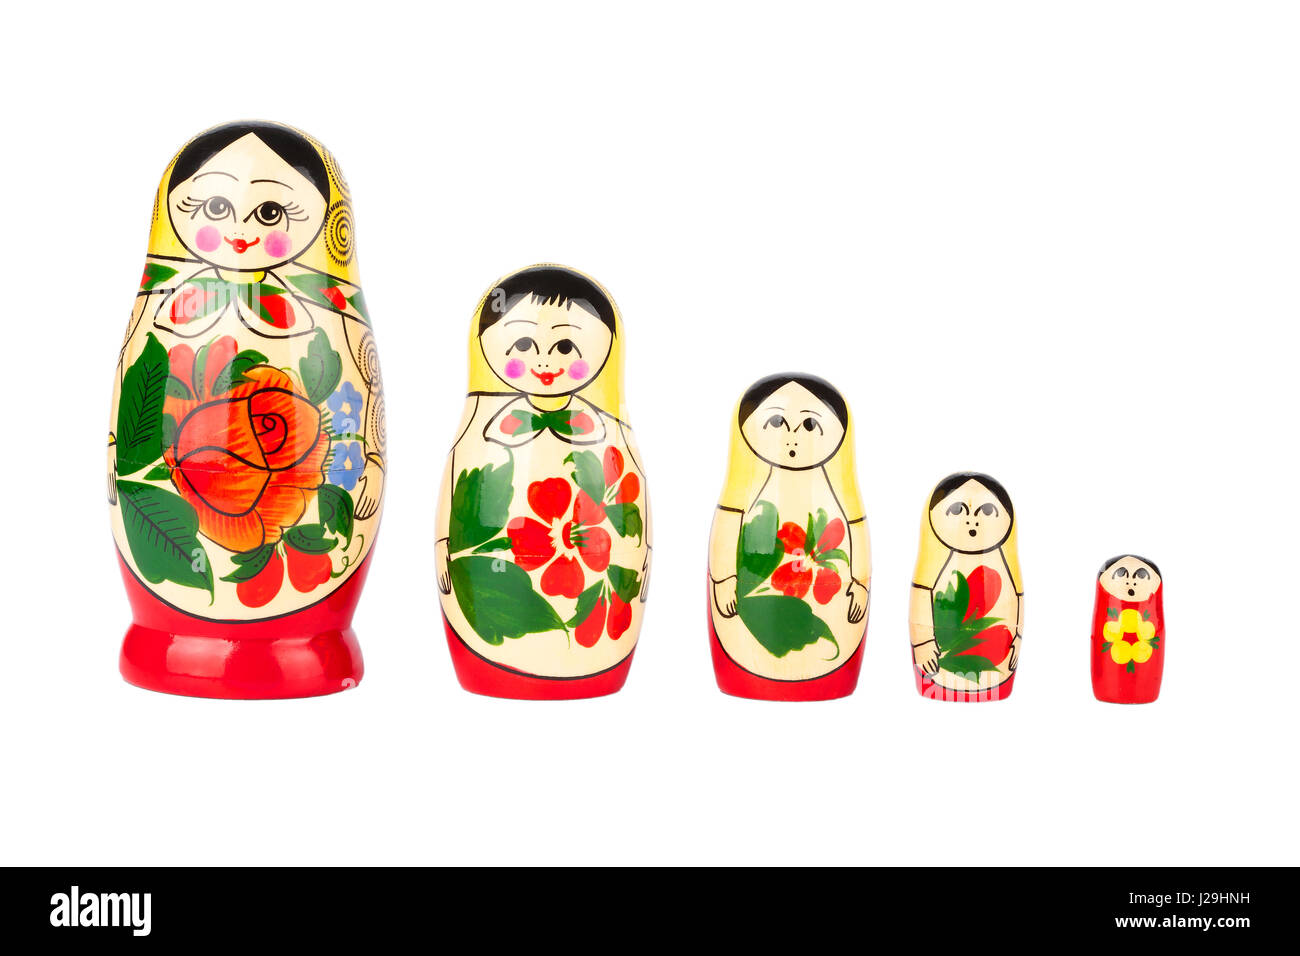 Russian nesting doll on white background. Stock Photo